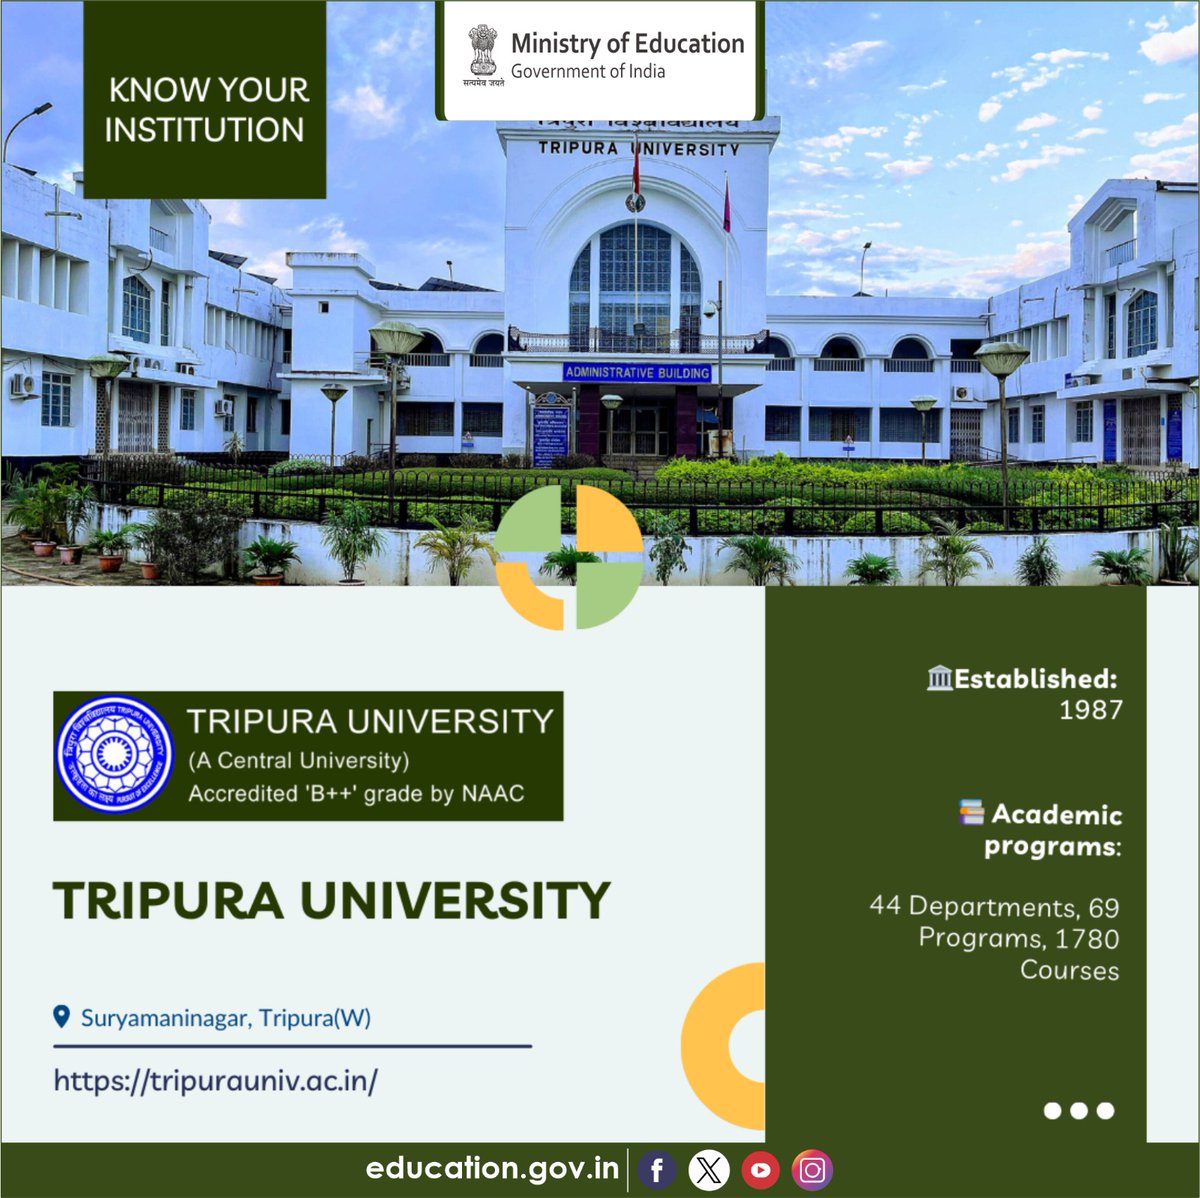 Know about the HEIs of India! Tripura University, founded in 1987, stands as a powerhouse of knowledge through its commitment to interdisciplinary and multi-disciplinary learning. The university offers a vast range of academic programmes with 147 courses dedicated to skill